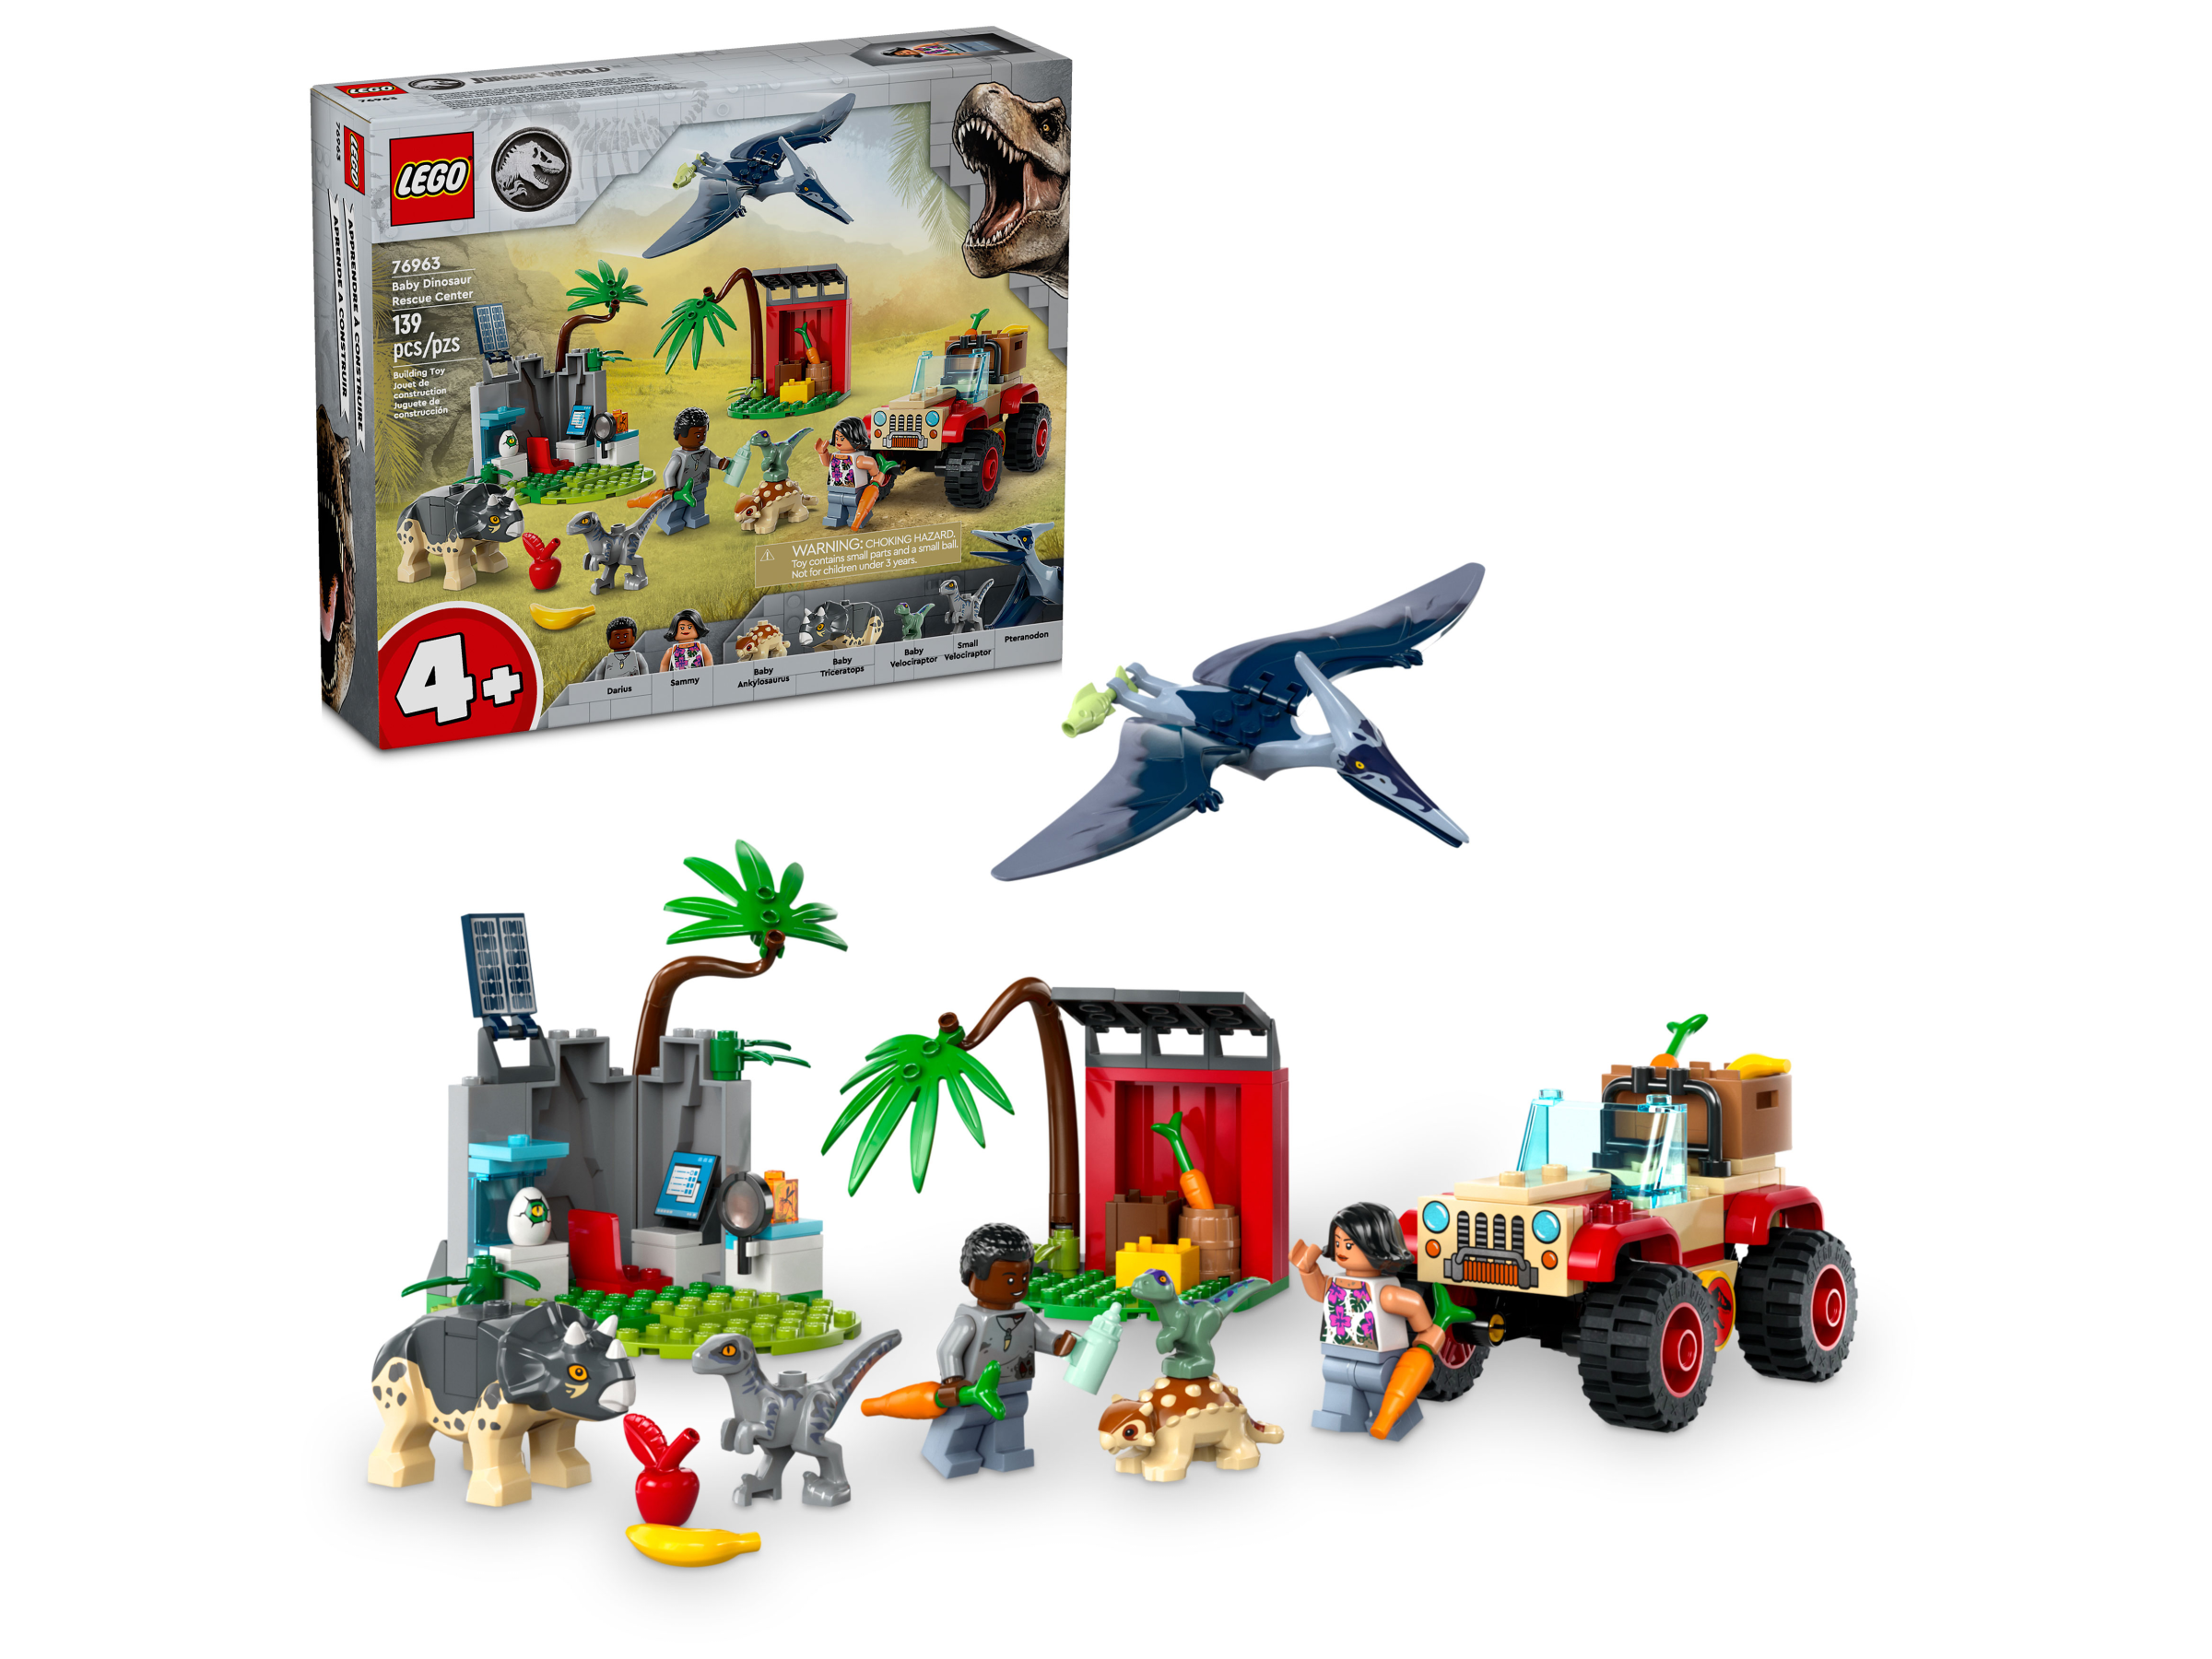 Jurassic World Toys And Gifts